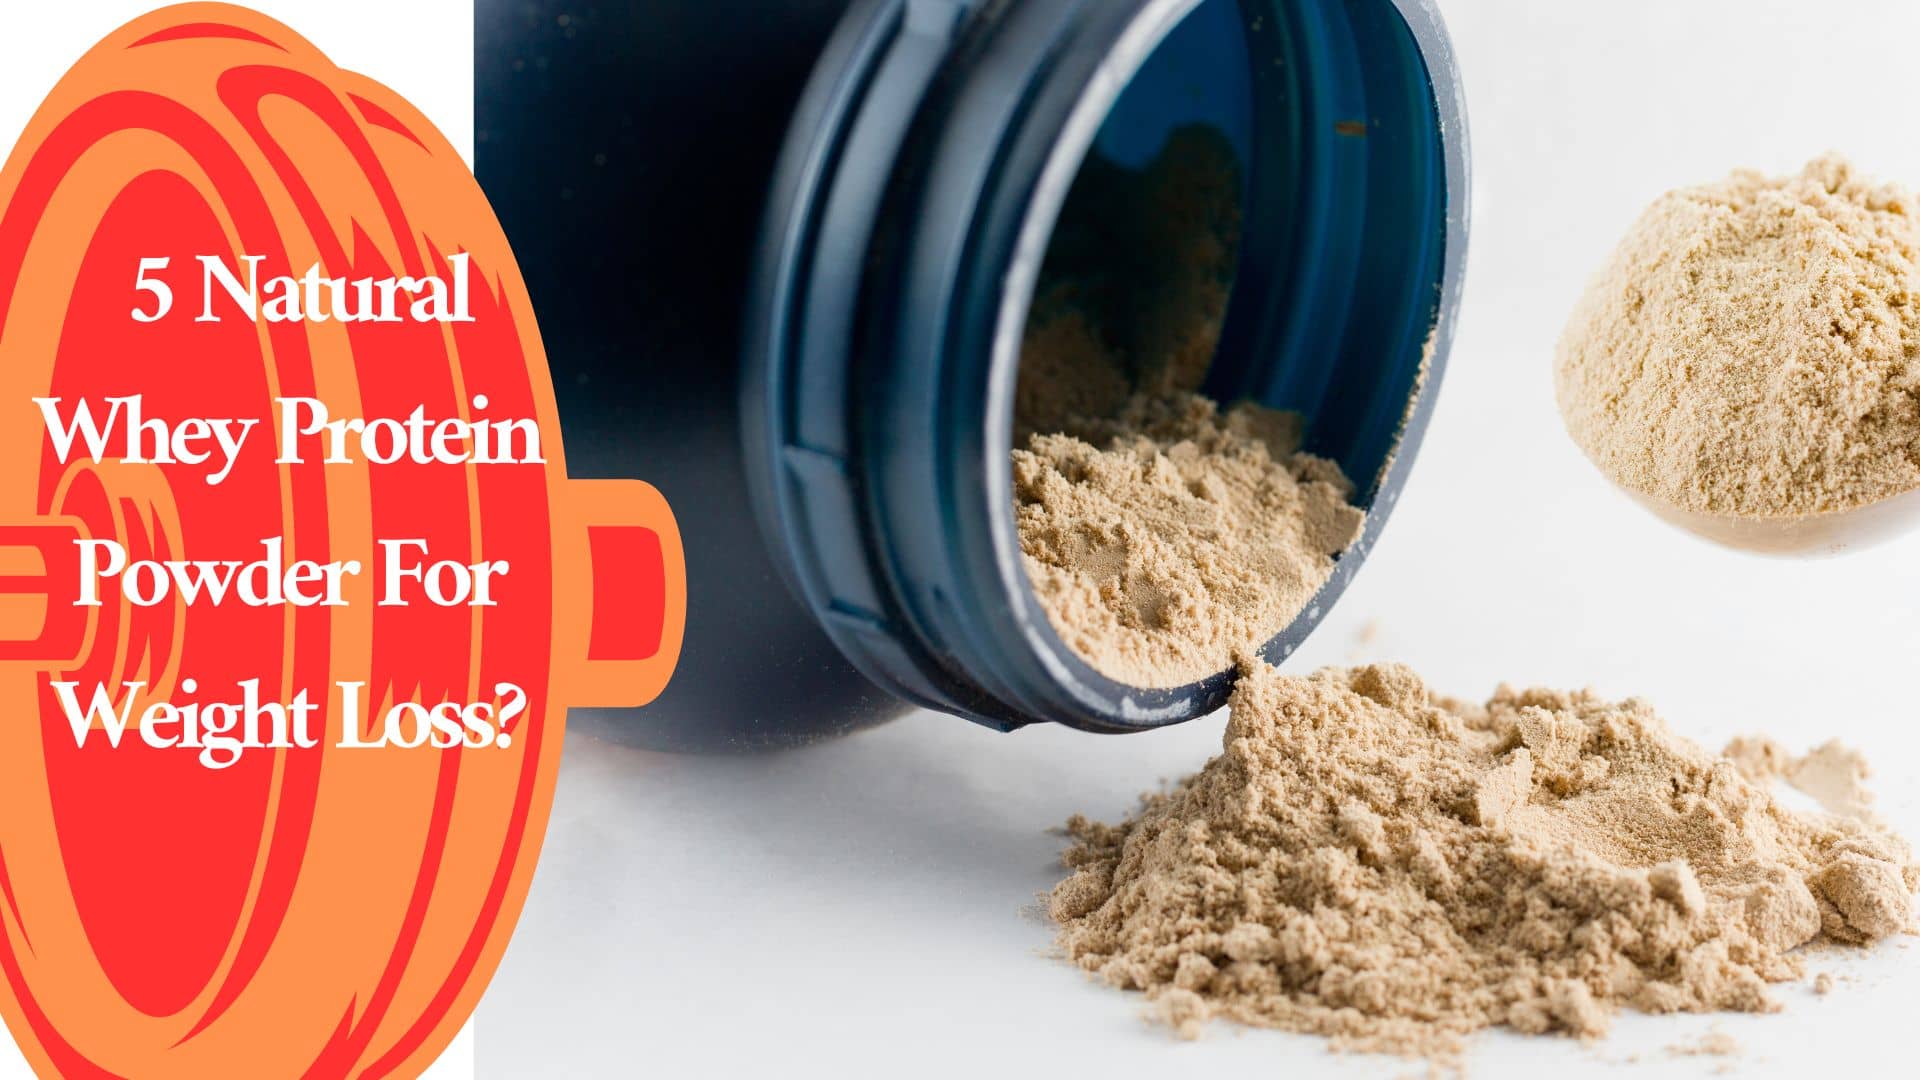 5 Natural Whey Protein Powder For Weight Loss?